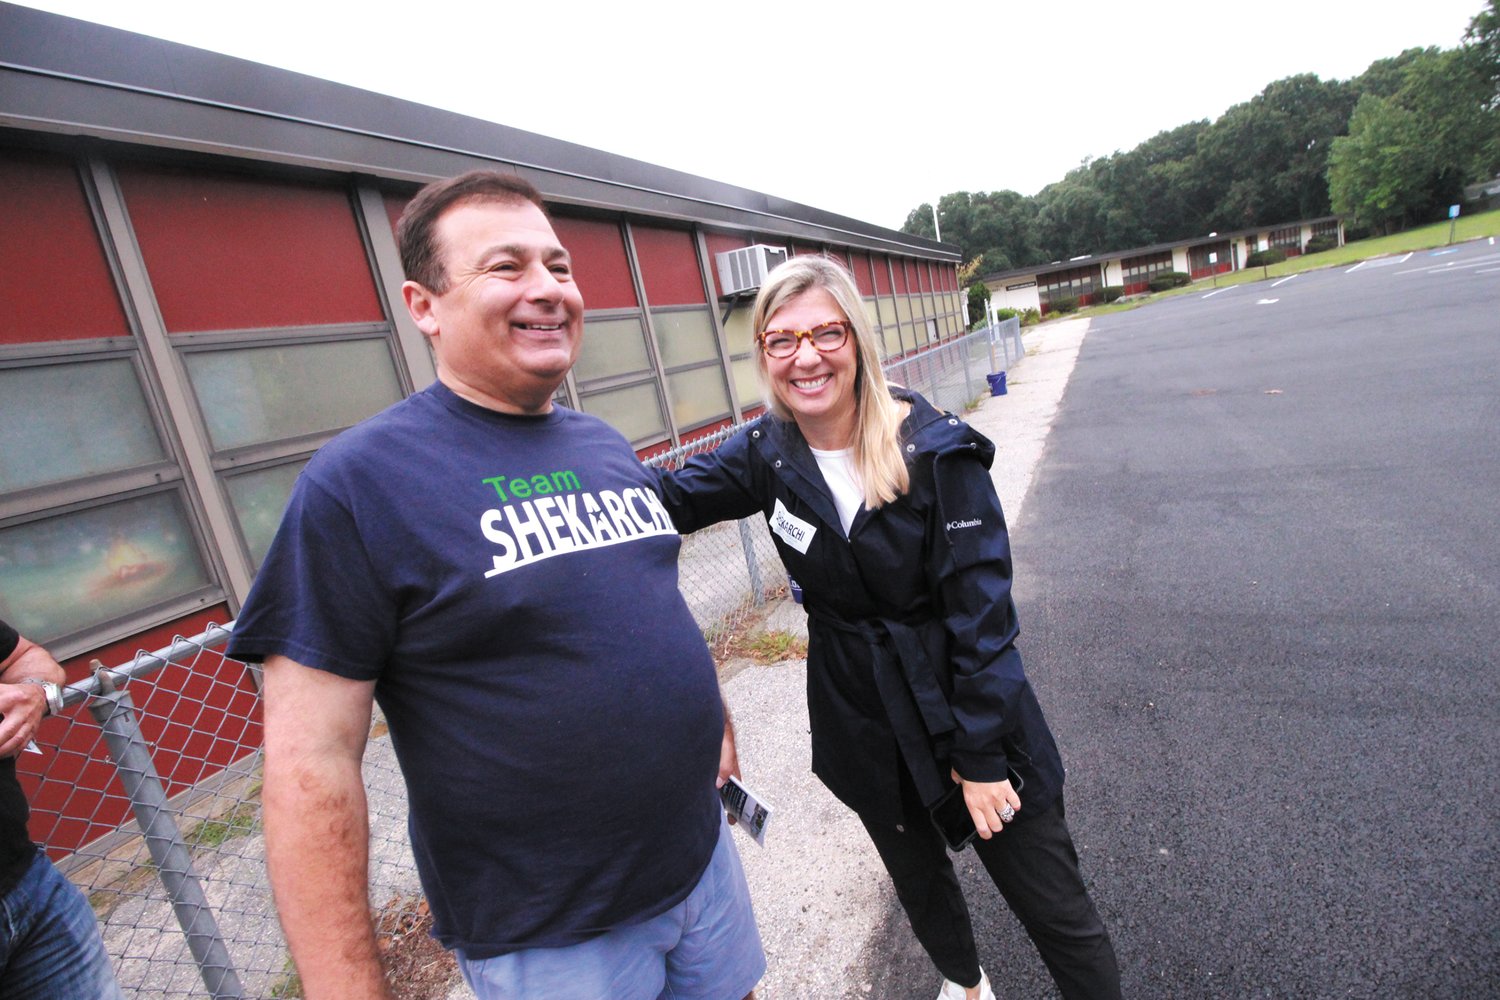 A PAT ON THE BACK: Nicole McCarty greets House Speaker K. Joseph Shekarchi outside the Park School poll early Tuesday morning.